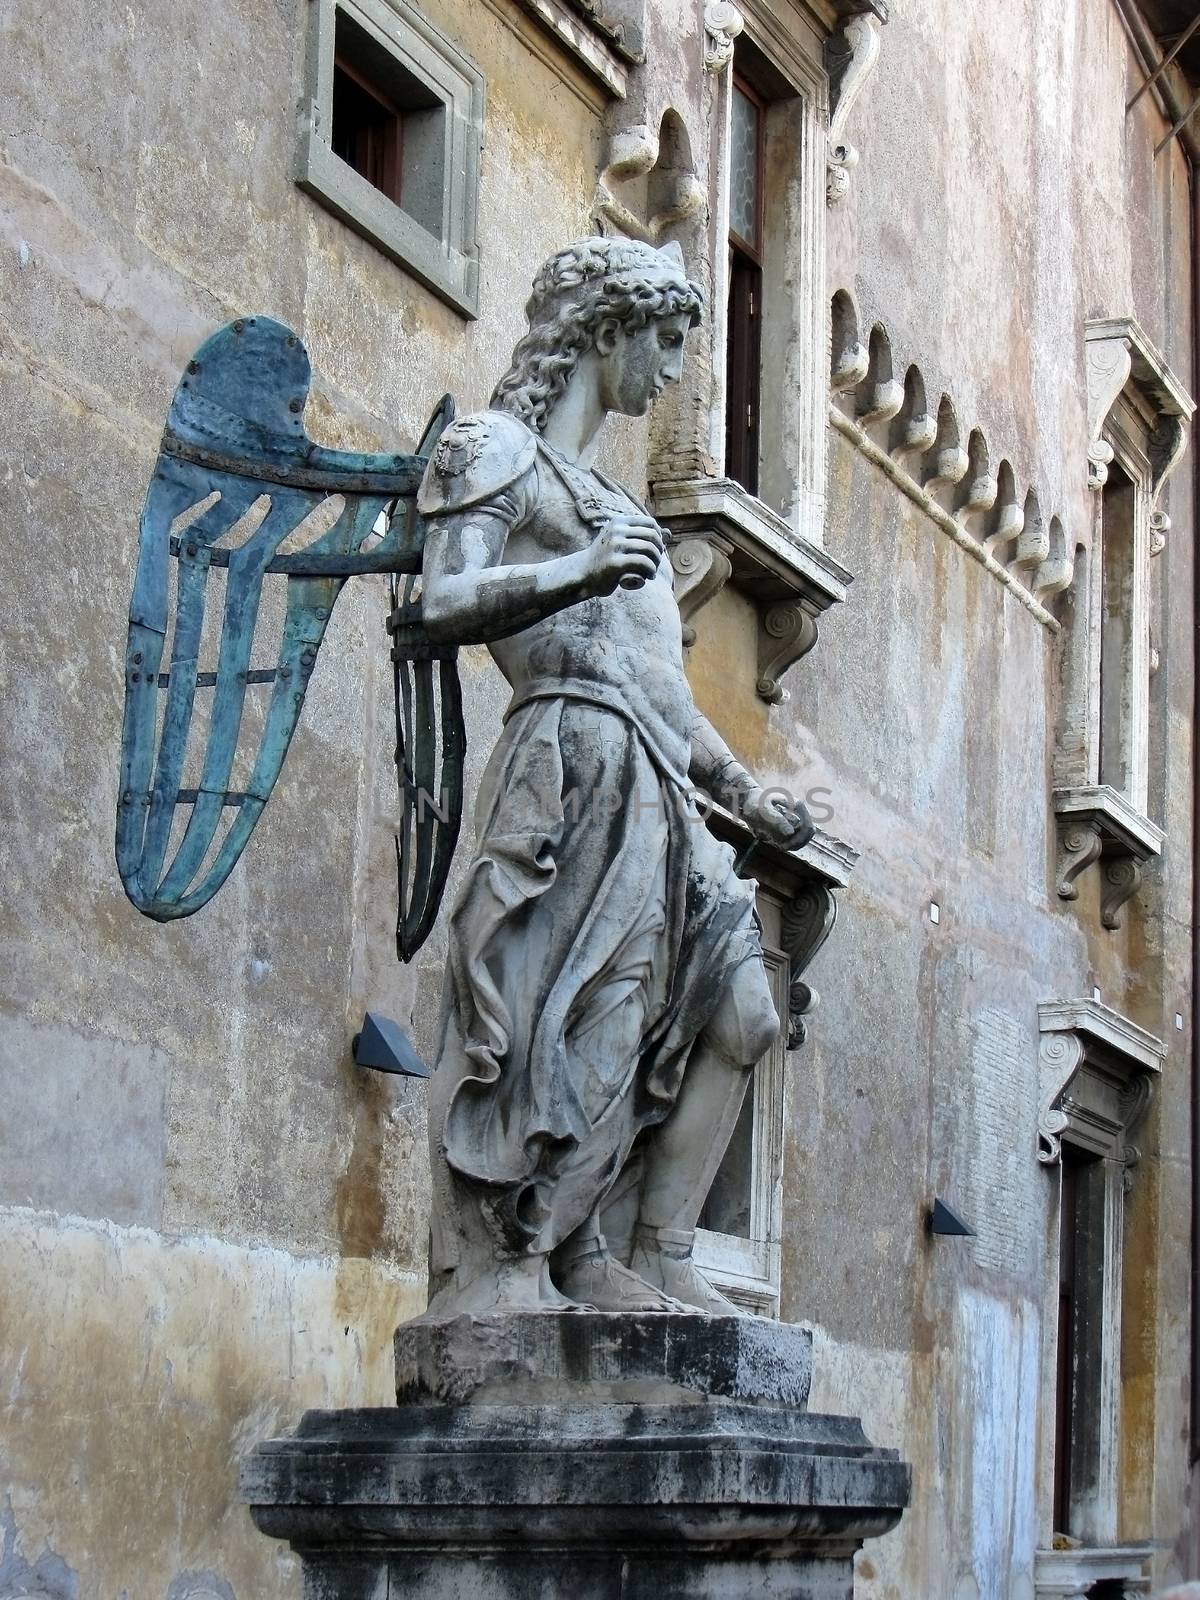 The statue of St. Michael the Archangel in Castel Sant'Angelo, Rome, Italy. by LanaLeta